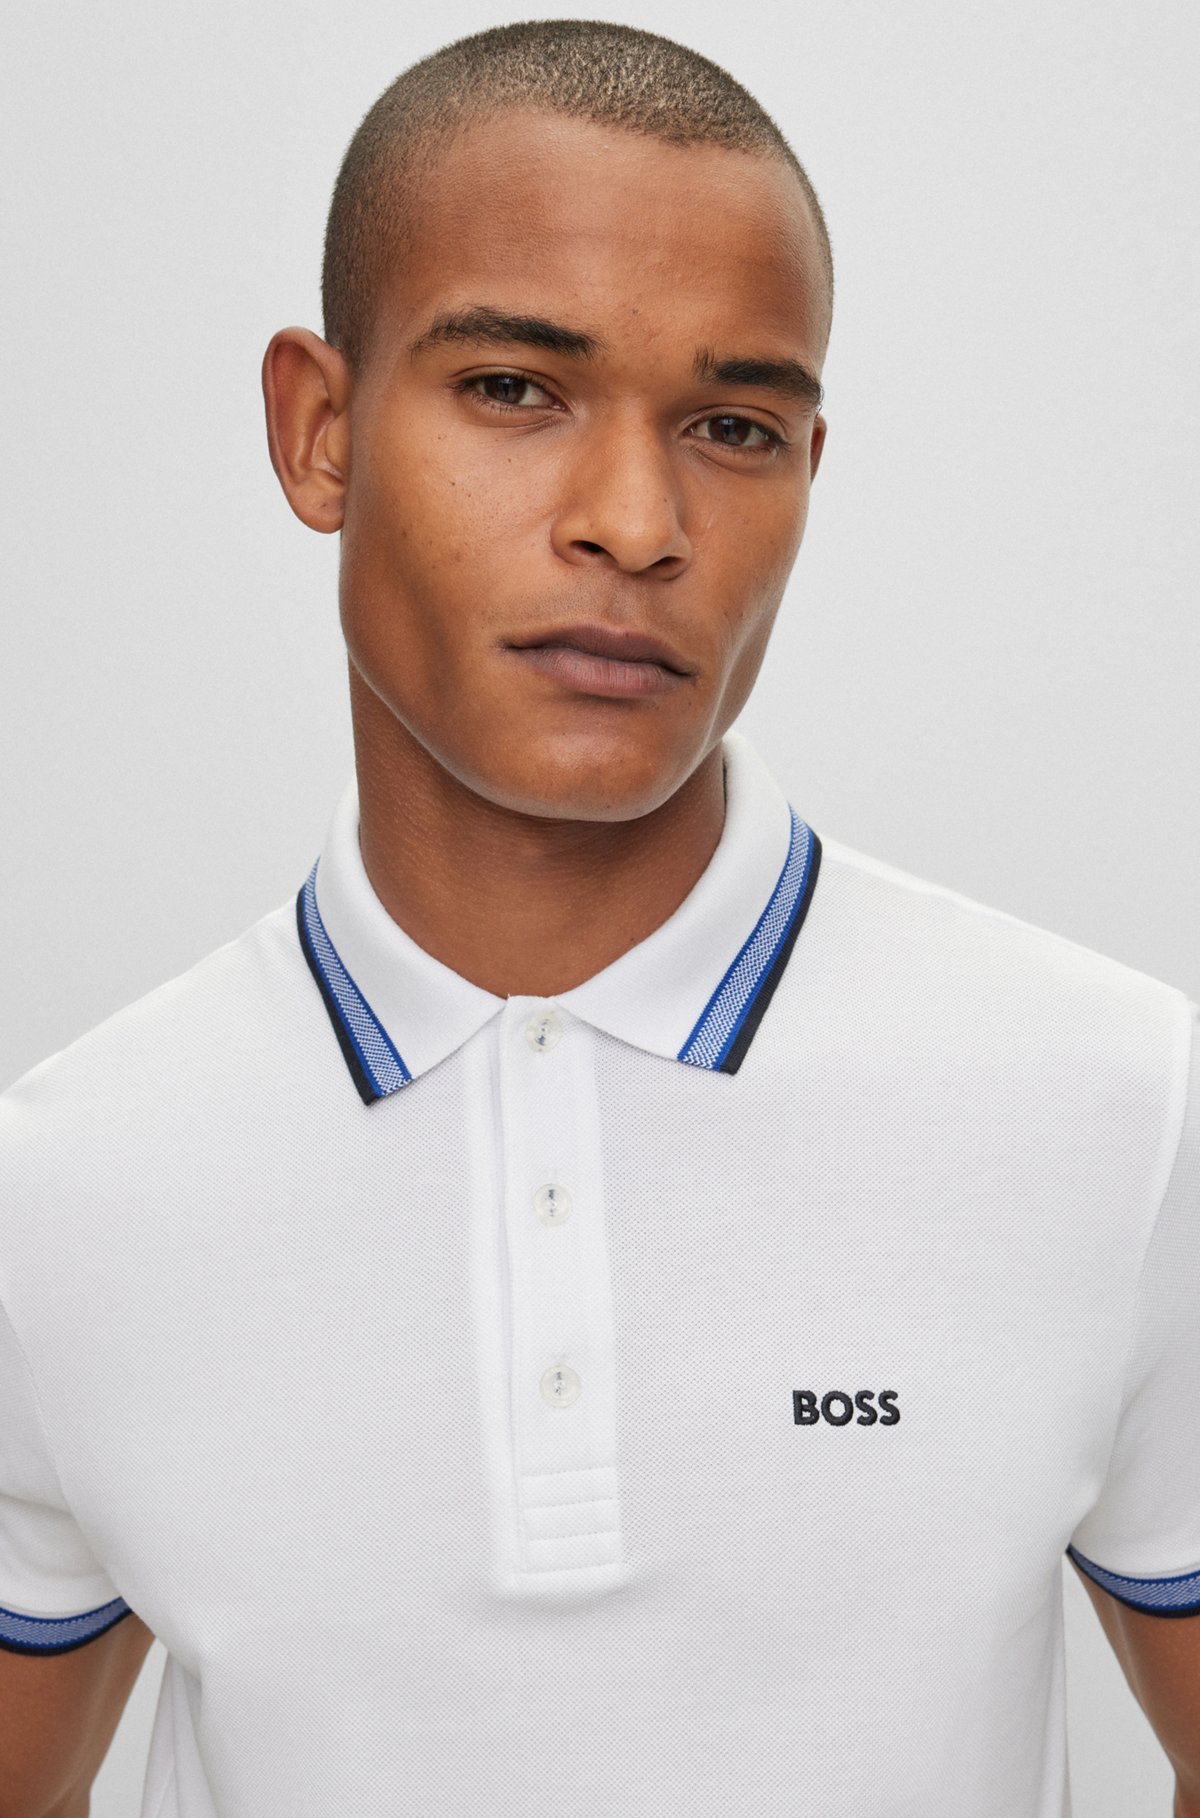 BOSS - Cotton polo shirt with branded undercollar